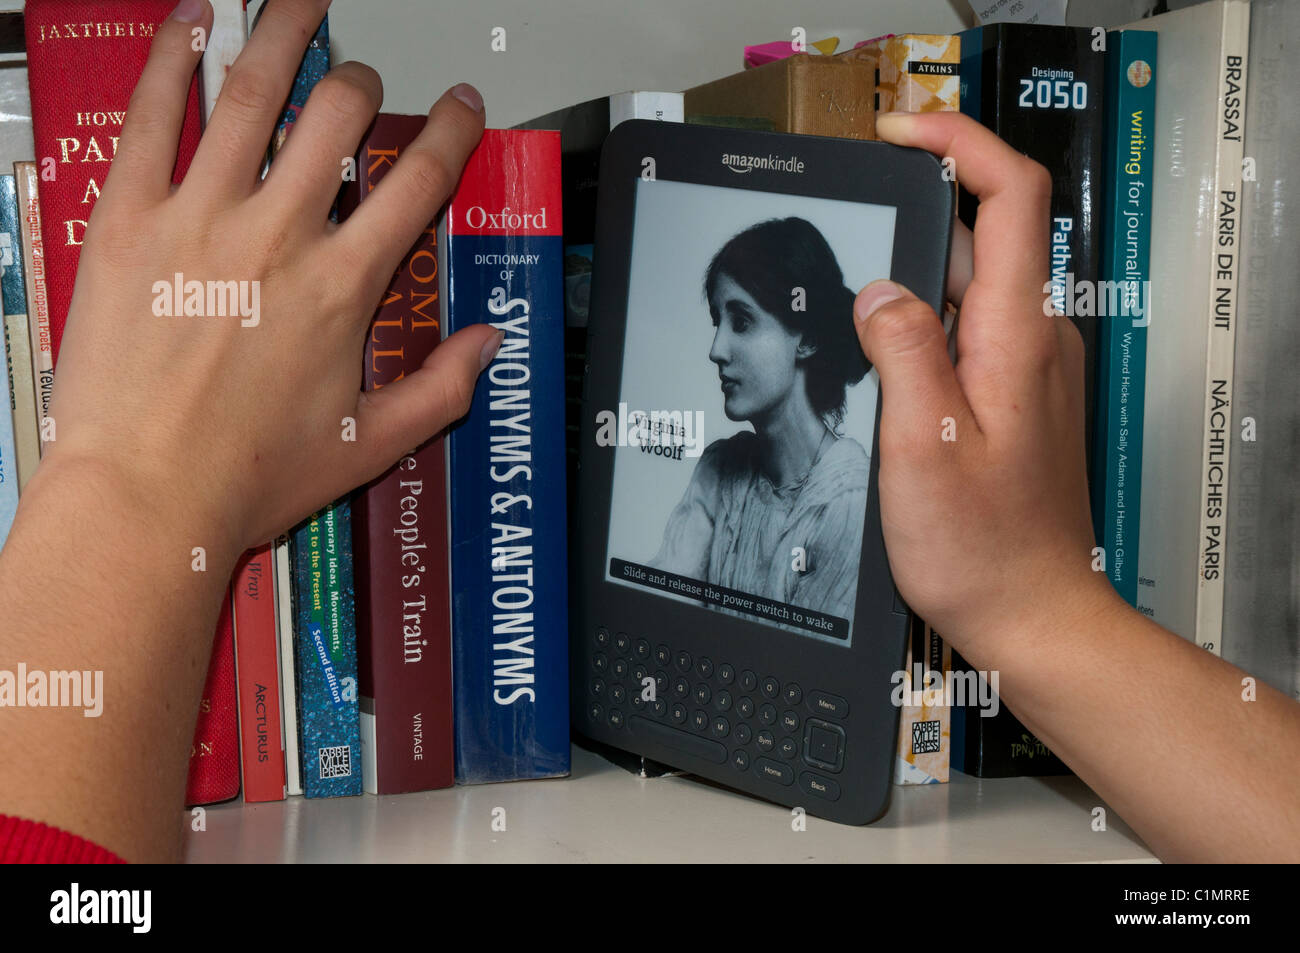 A Kindle model 3 ebook reader being inserted iamongst traditional print books on a bookshelf Stock Photo